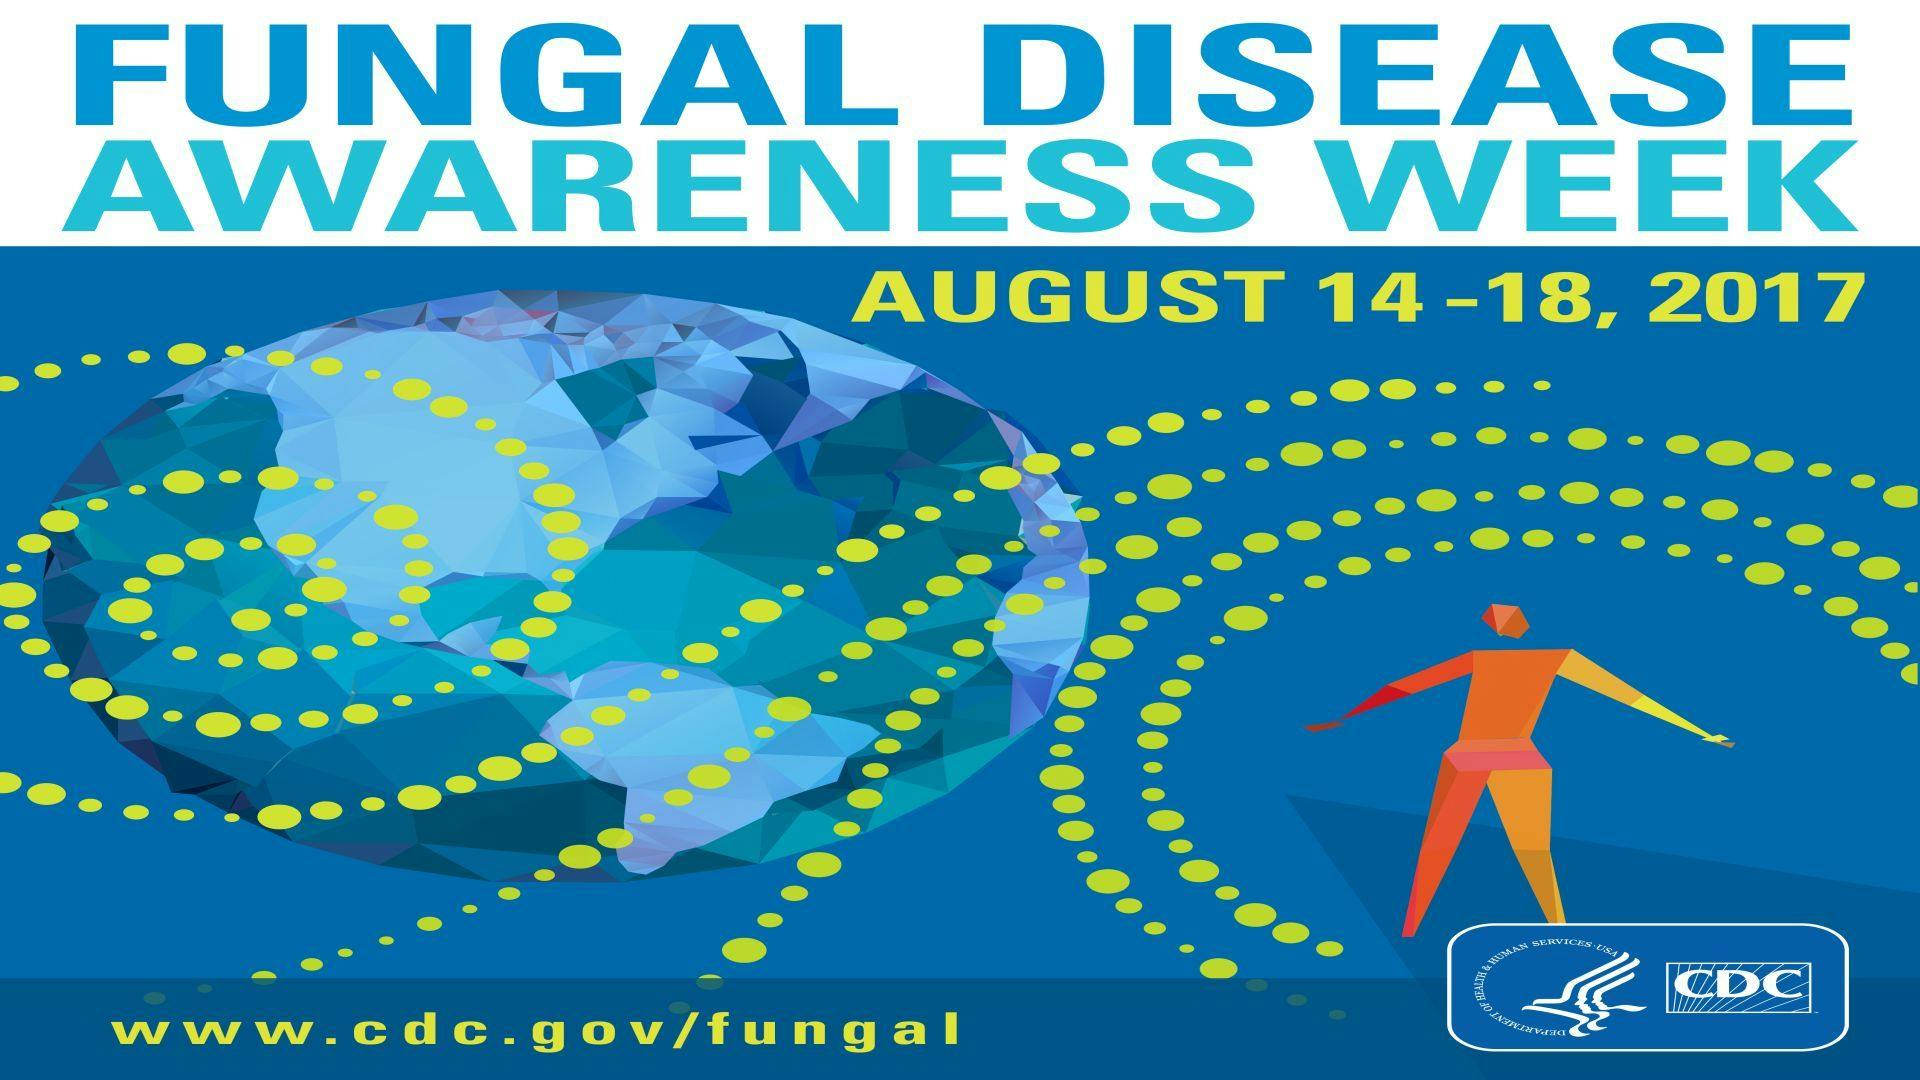 First Fungal Disease Awareness Week Encourages Patients, Doctors to 'Think Fungus'